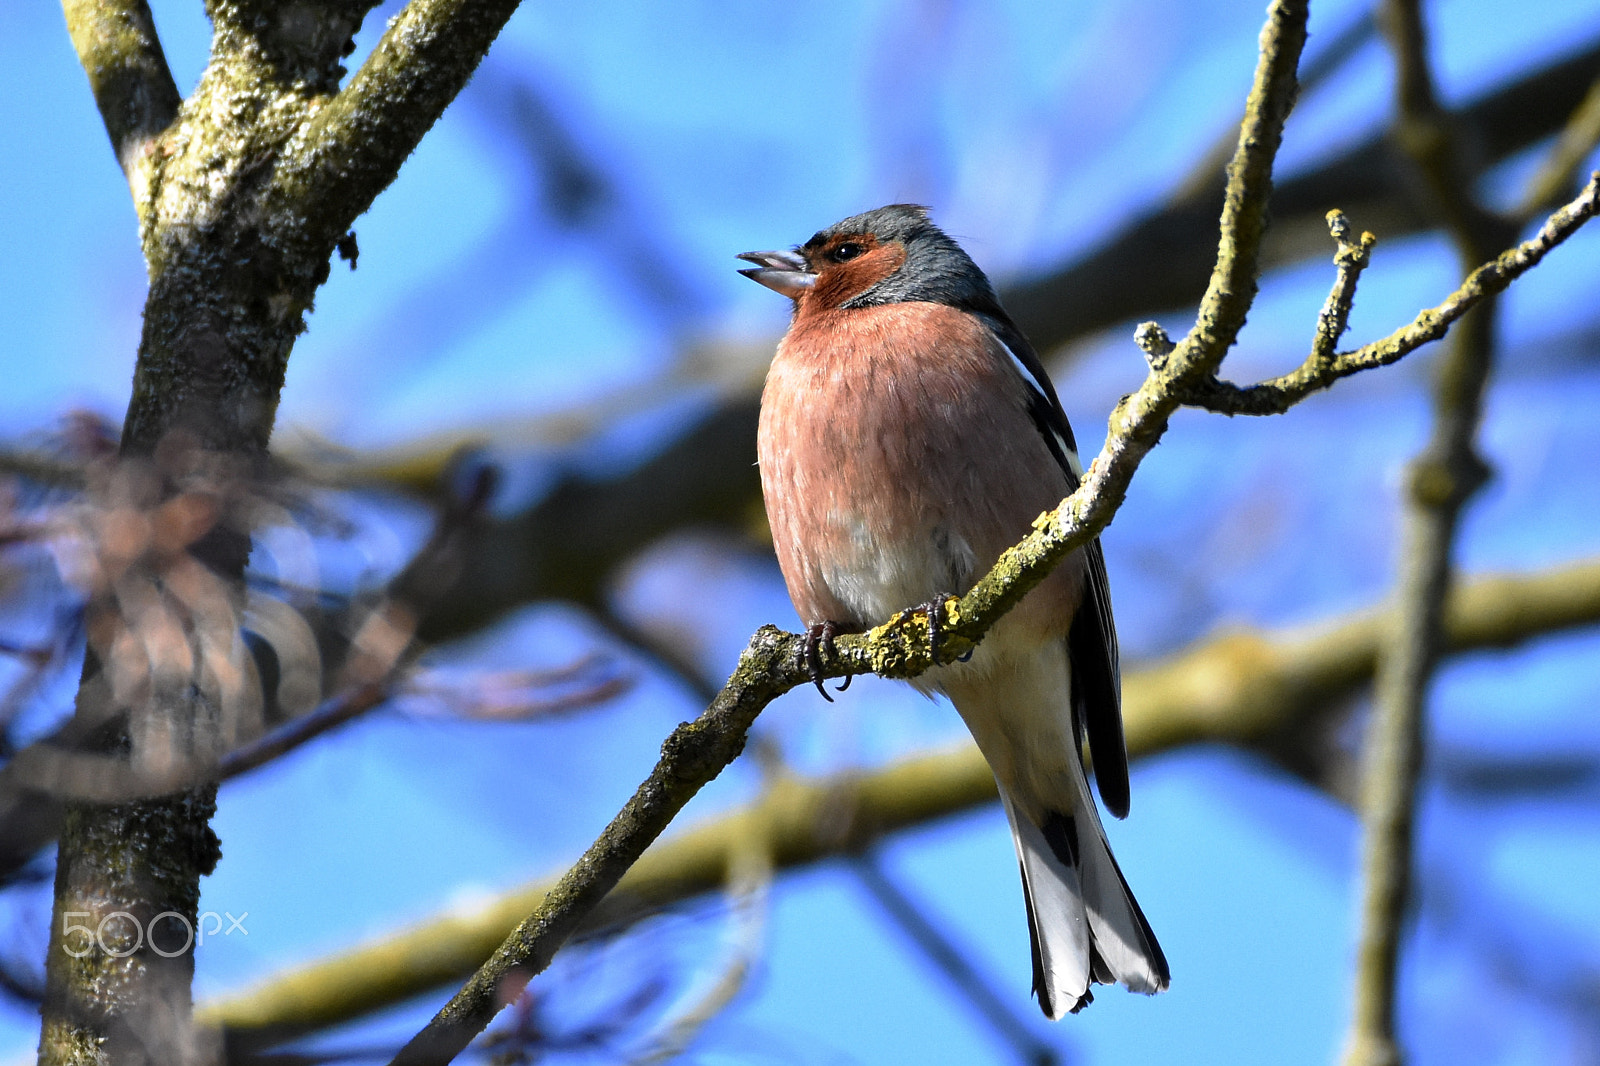 Nikon D7200 + Sigma 150-600mm F5-6.3 DG OS HSM | C sample photo. Common chaffinch photography